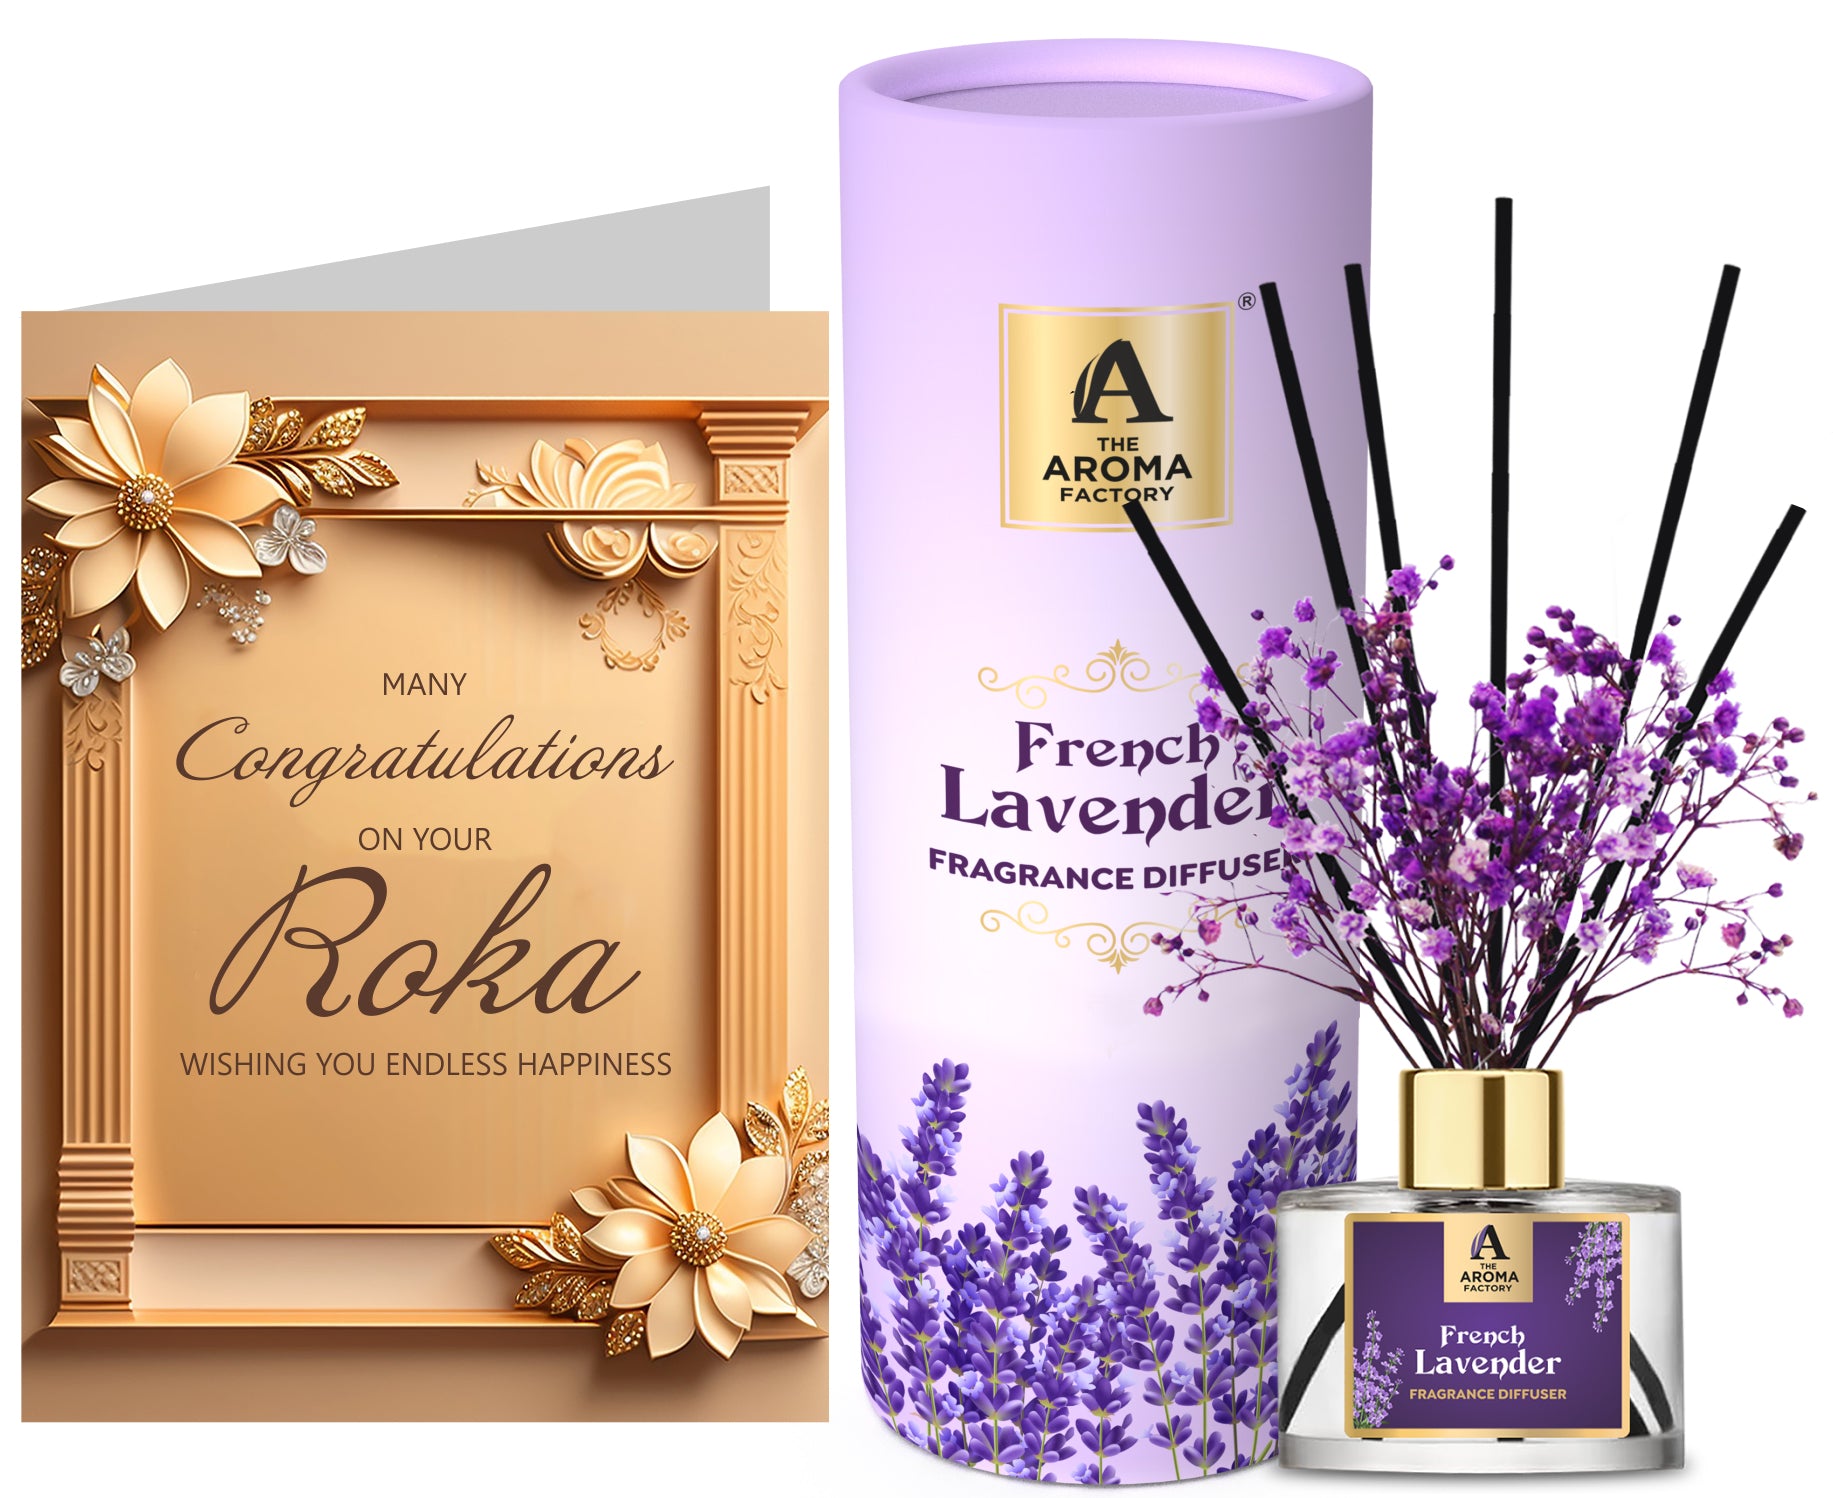 The Aroma Factory Gift for Roka Ceremony/pre Engagement Hamper with Card, French Lavender Fragrance Reed Diffuser Set (1 Box + 1 Card)